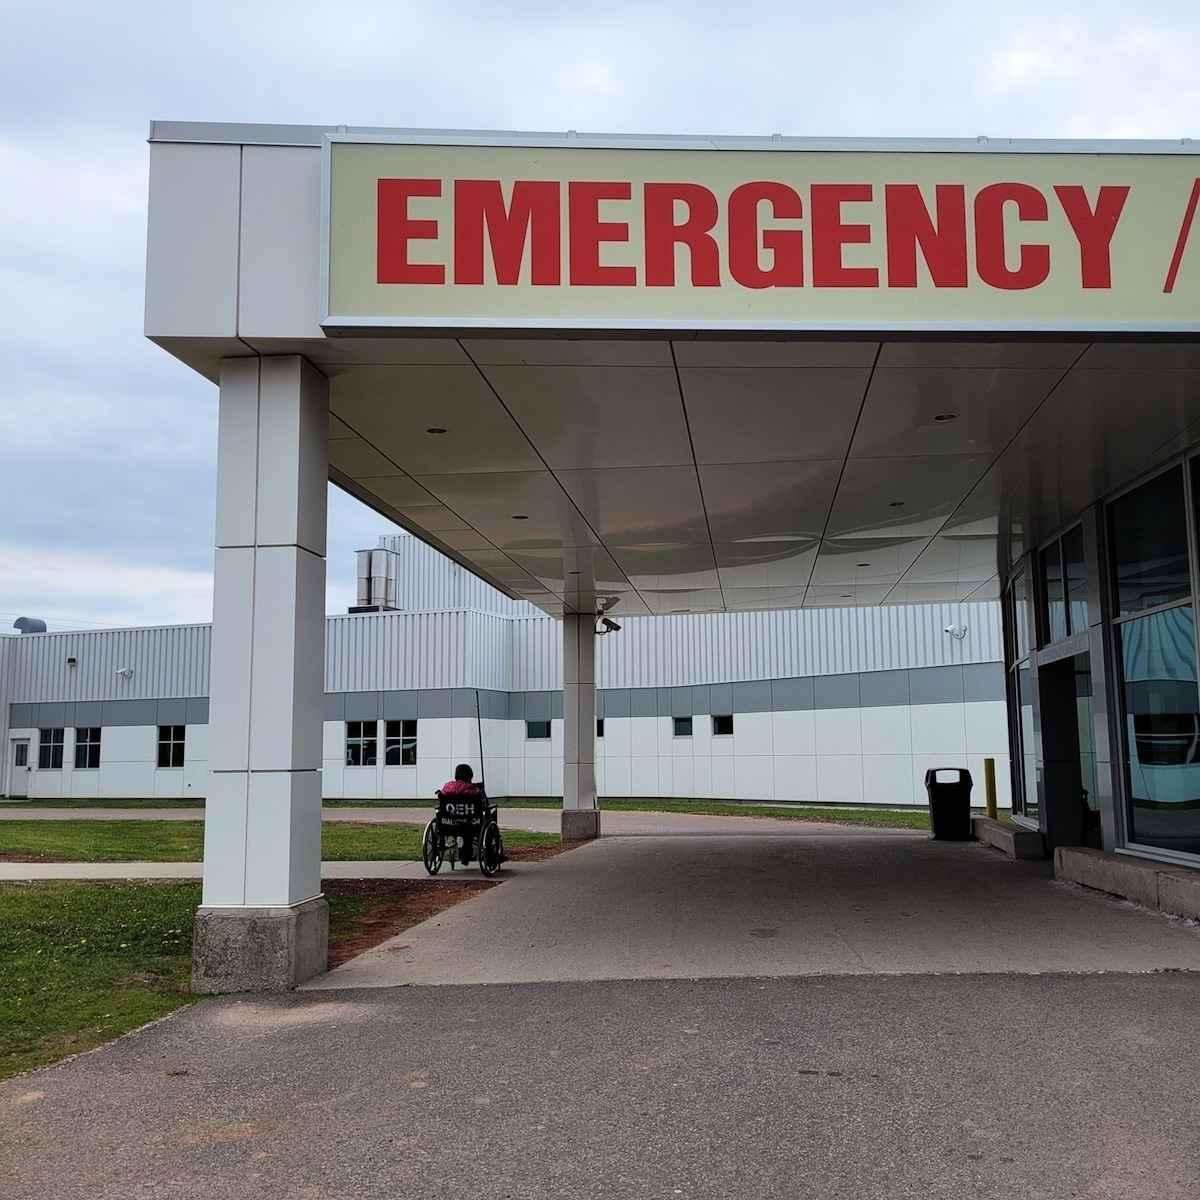 Celia encountered an accident at home on Prince Edward Island, Canada, in June. She headed to the emergency room as she had fractured her left arm at home. (Courtesy of Celia Cheng)